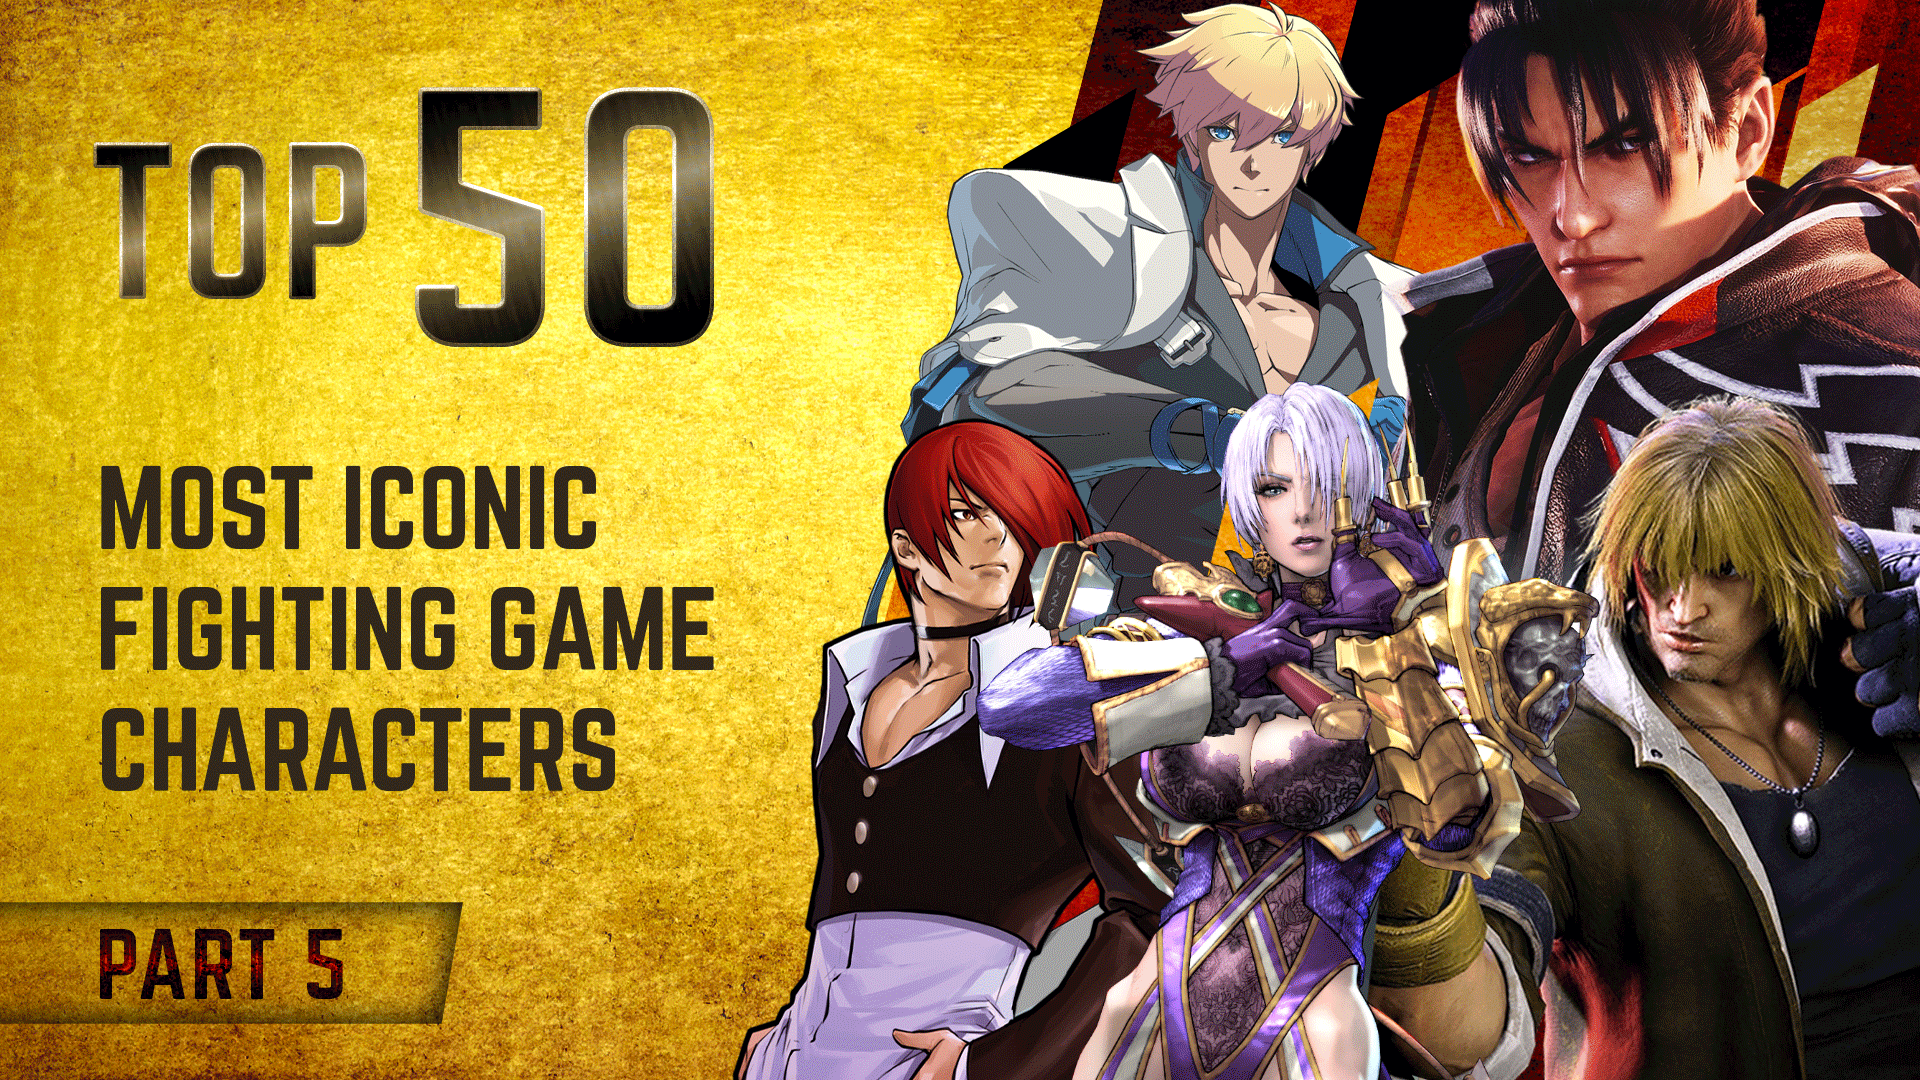 Top 50 Most Iconic Fighting Game Characters - Part 5